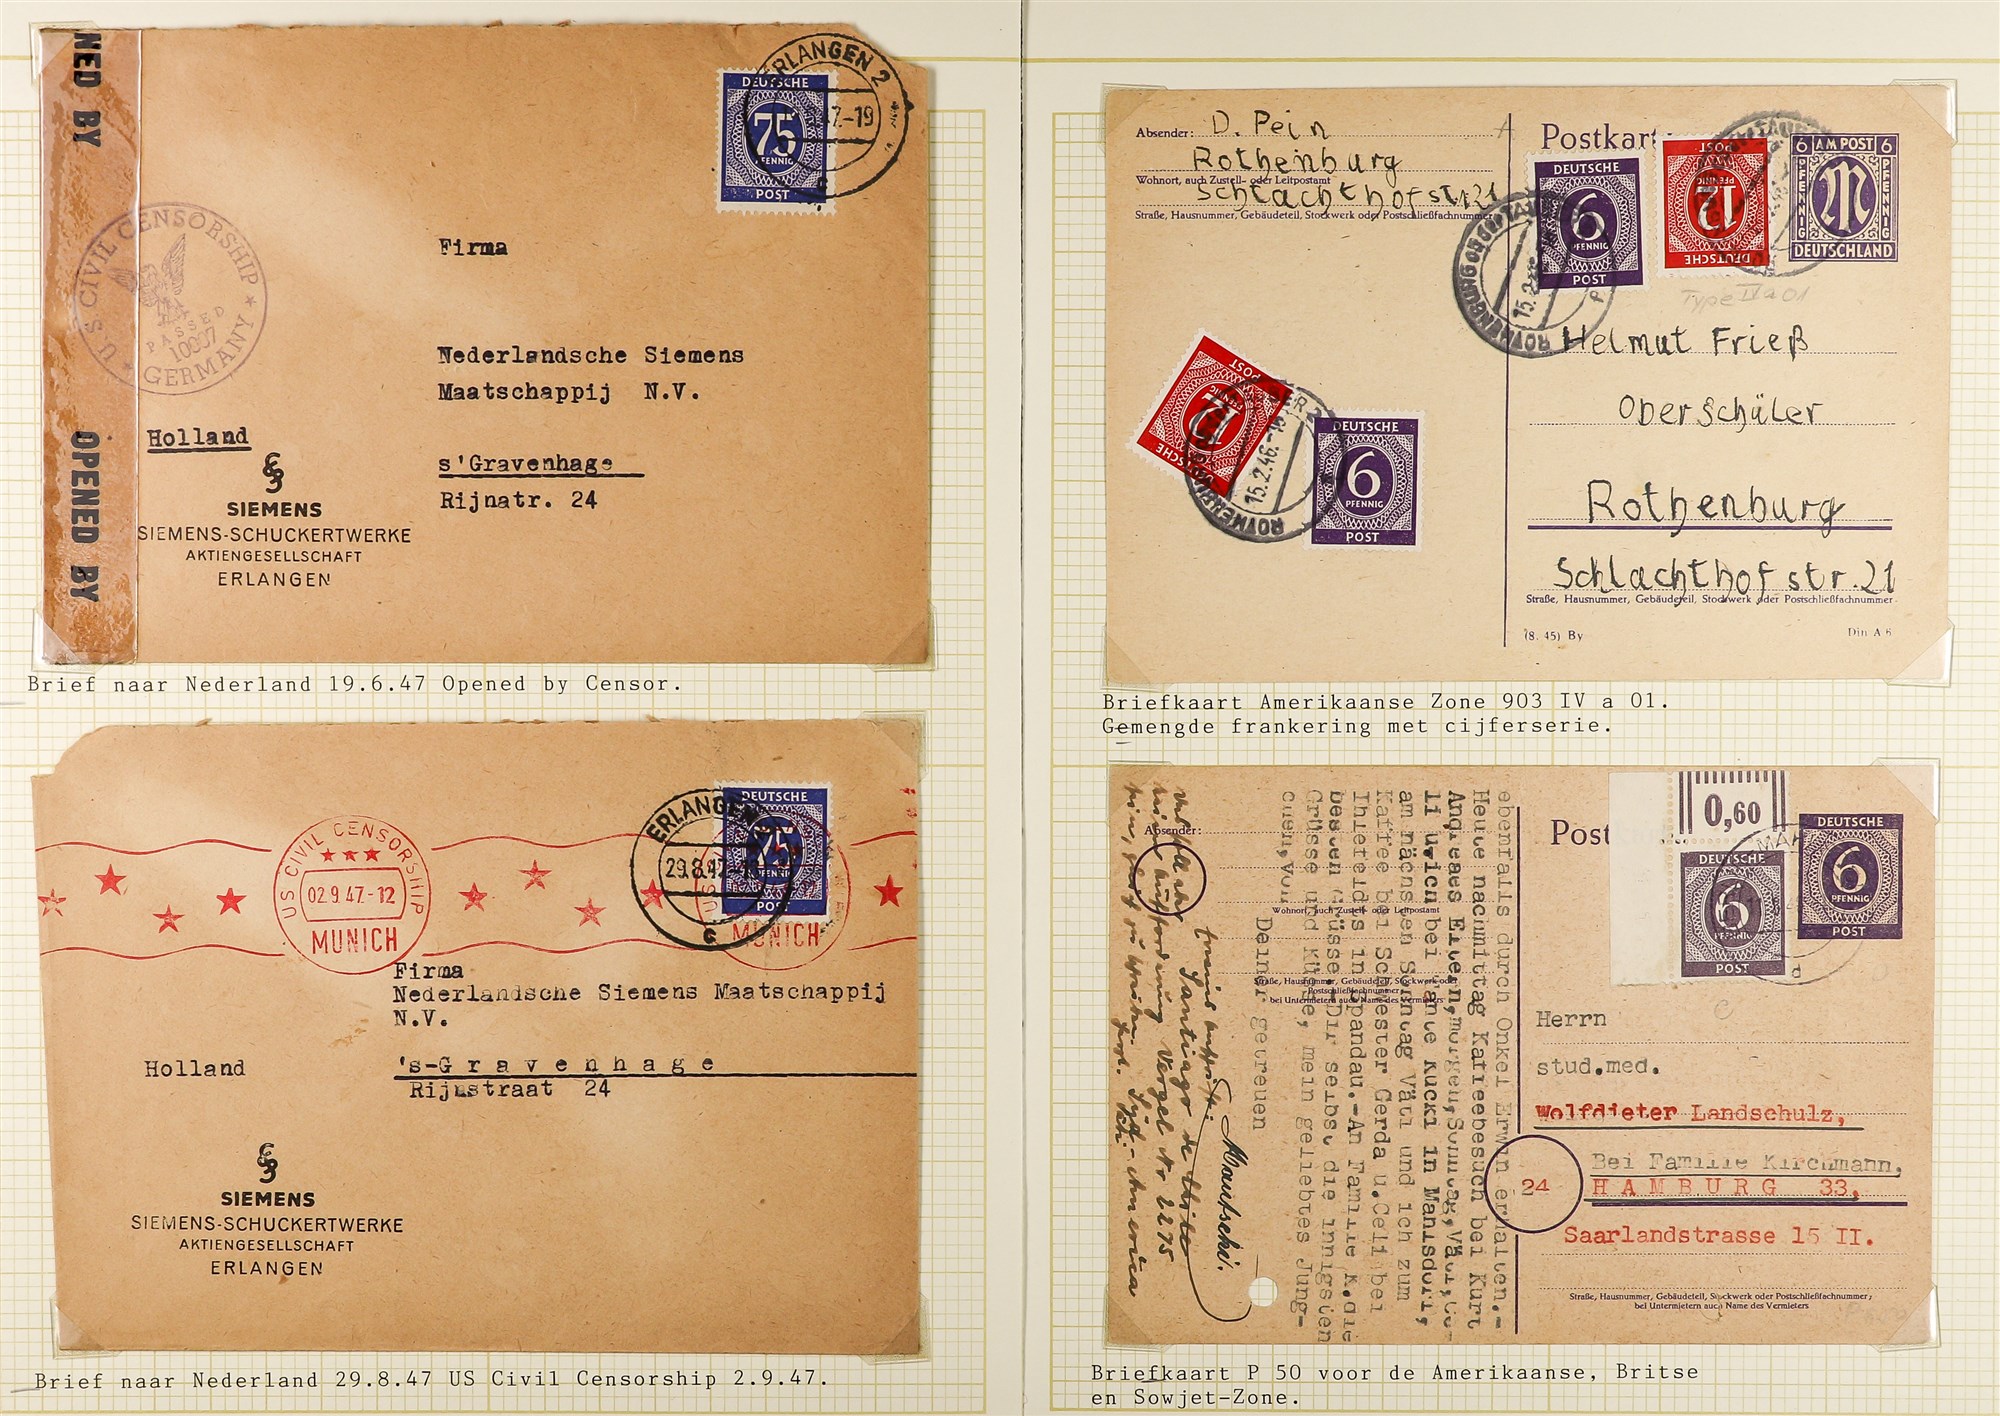 GERMAN ALLIED ZONES 1945 - 1951 COVERS COLLECTION around 60 items from various allied zones,